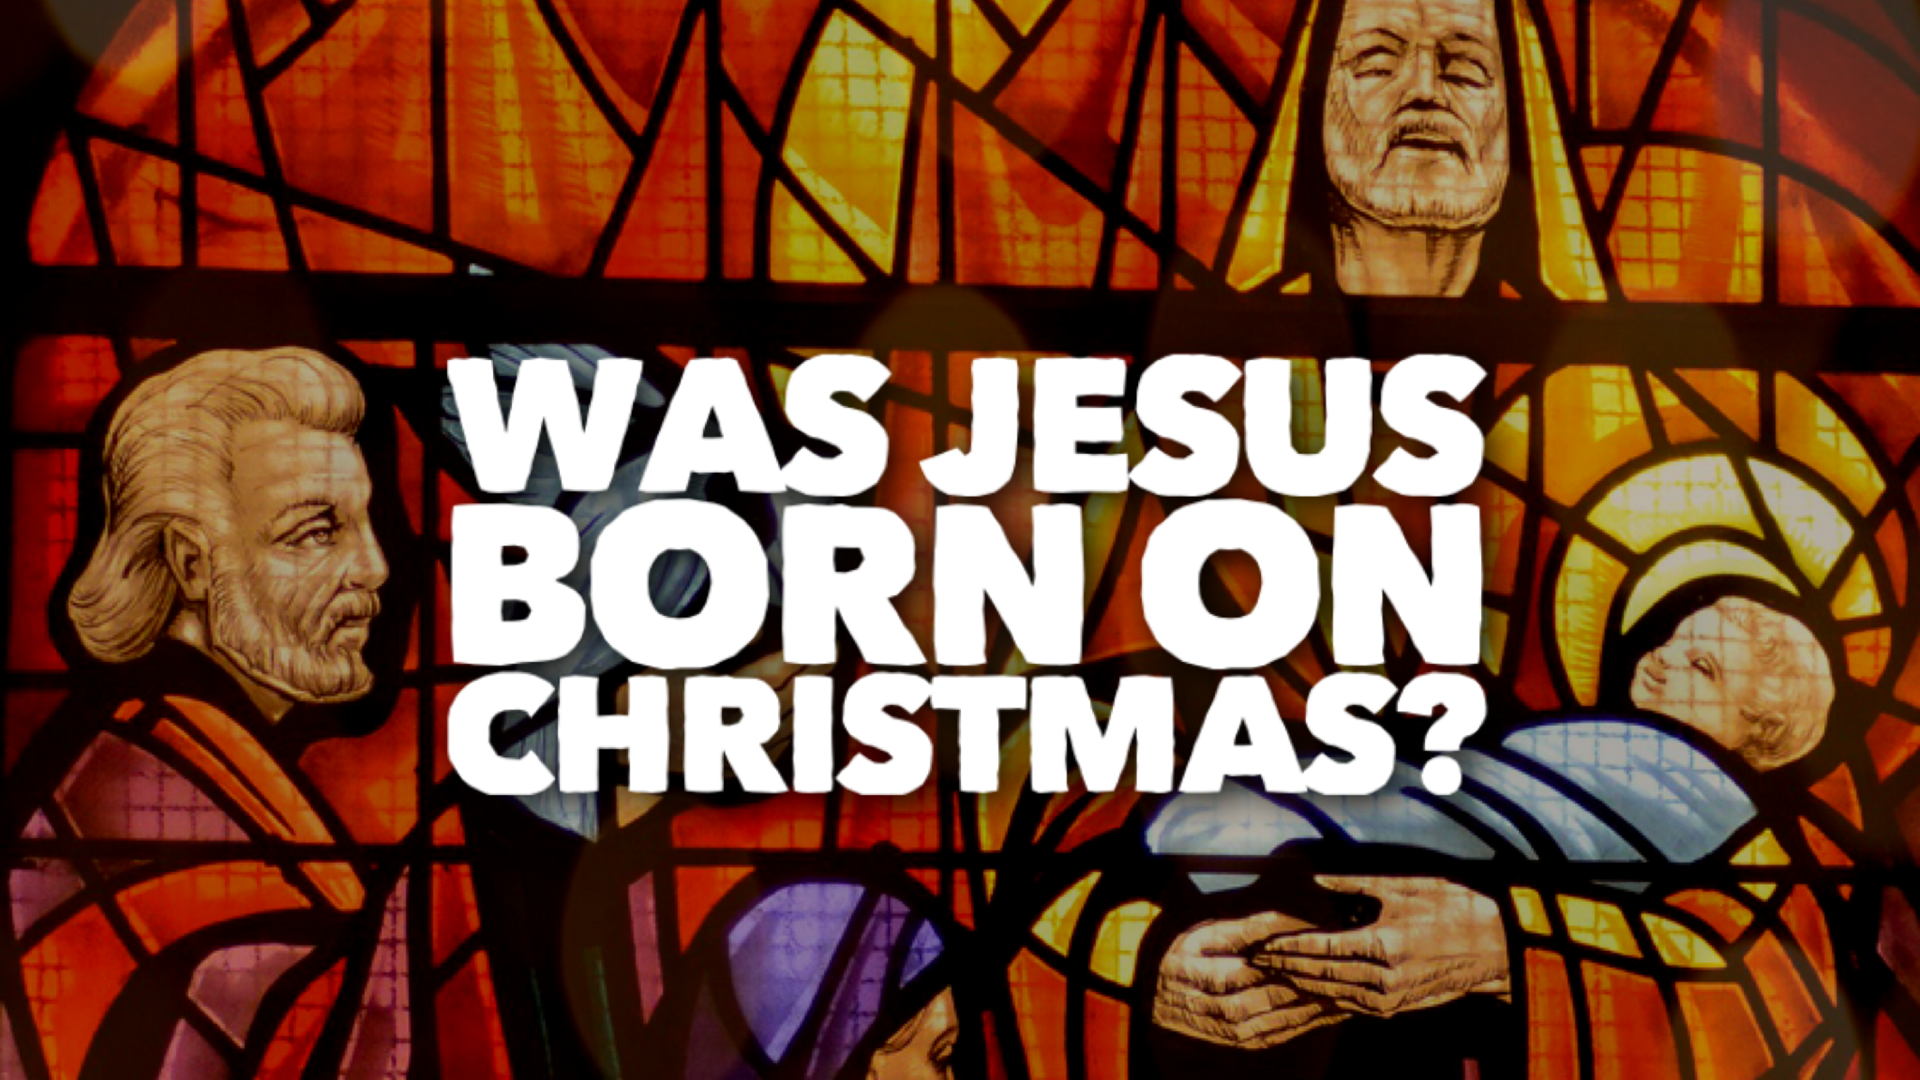 There is lingering speculation that Jesus' birth date was arranged to coincide with a pagan Roman holiday, but most experts find little written evidence for that.